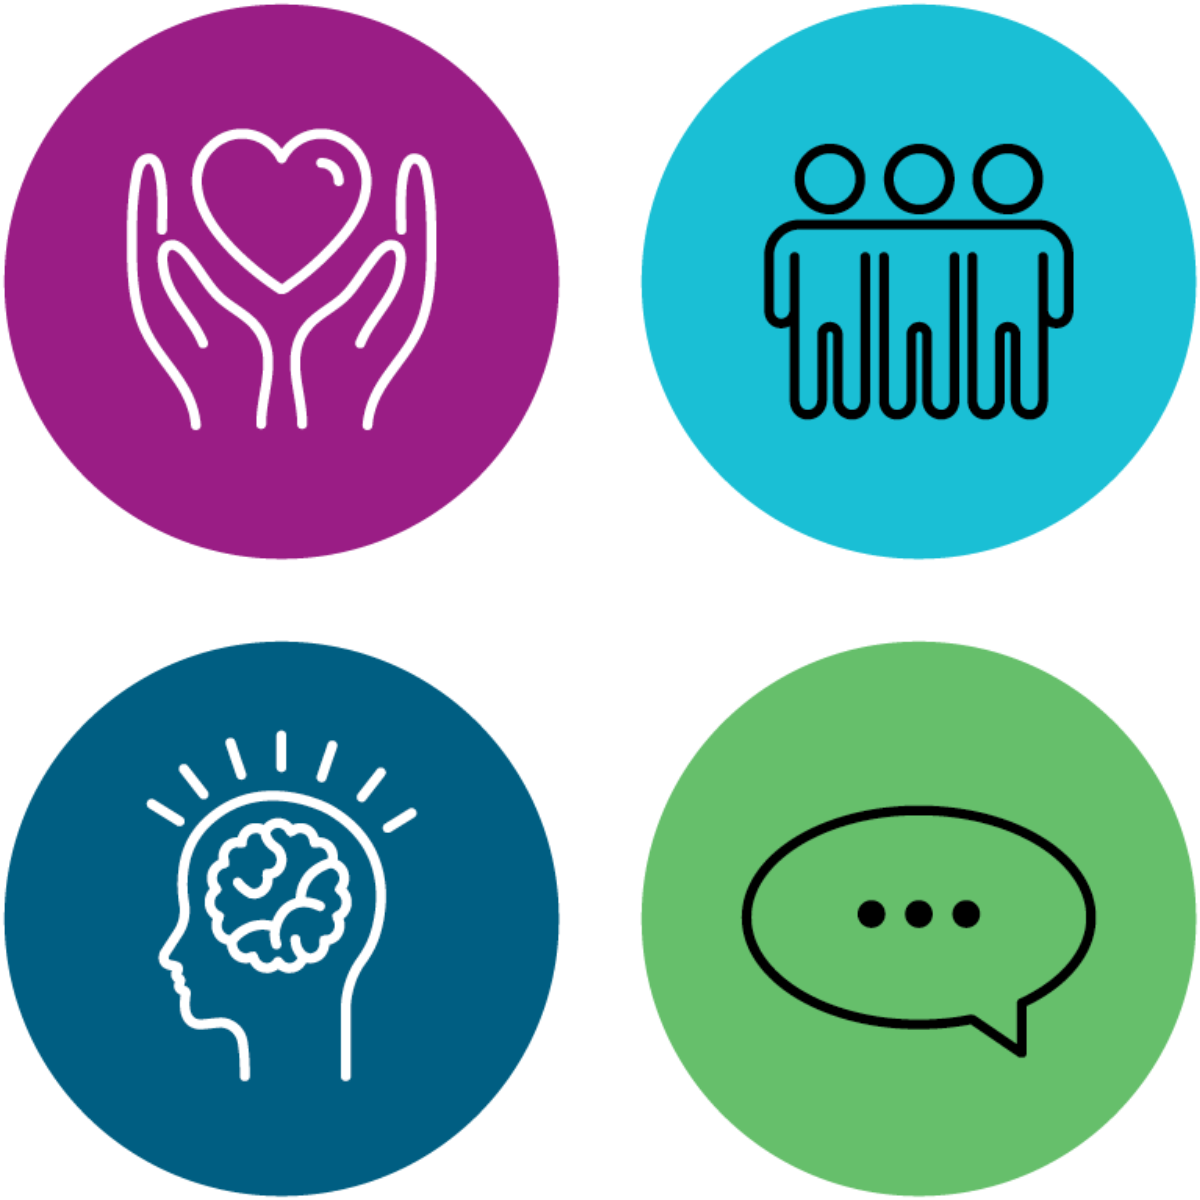 Four circular icons in purple, blue, teal and green. A heart in hands, three people side by side, a thinking brain, and a speech bubble.